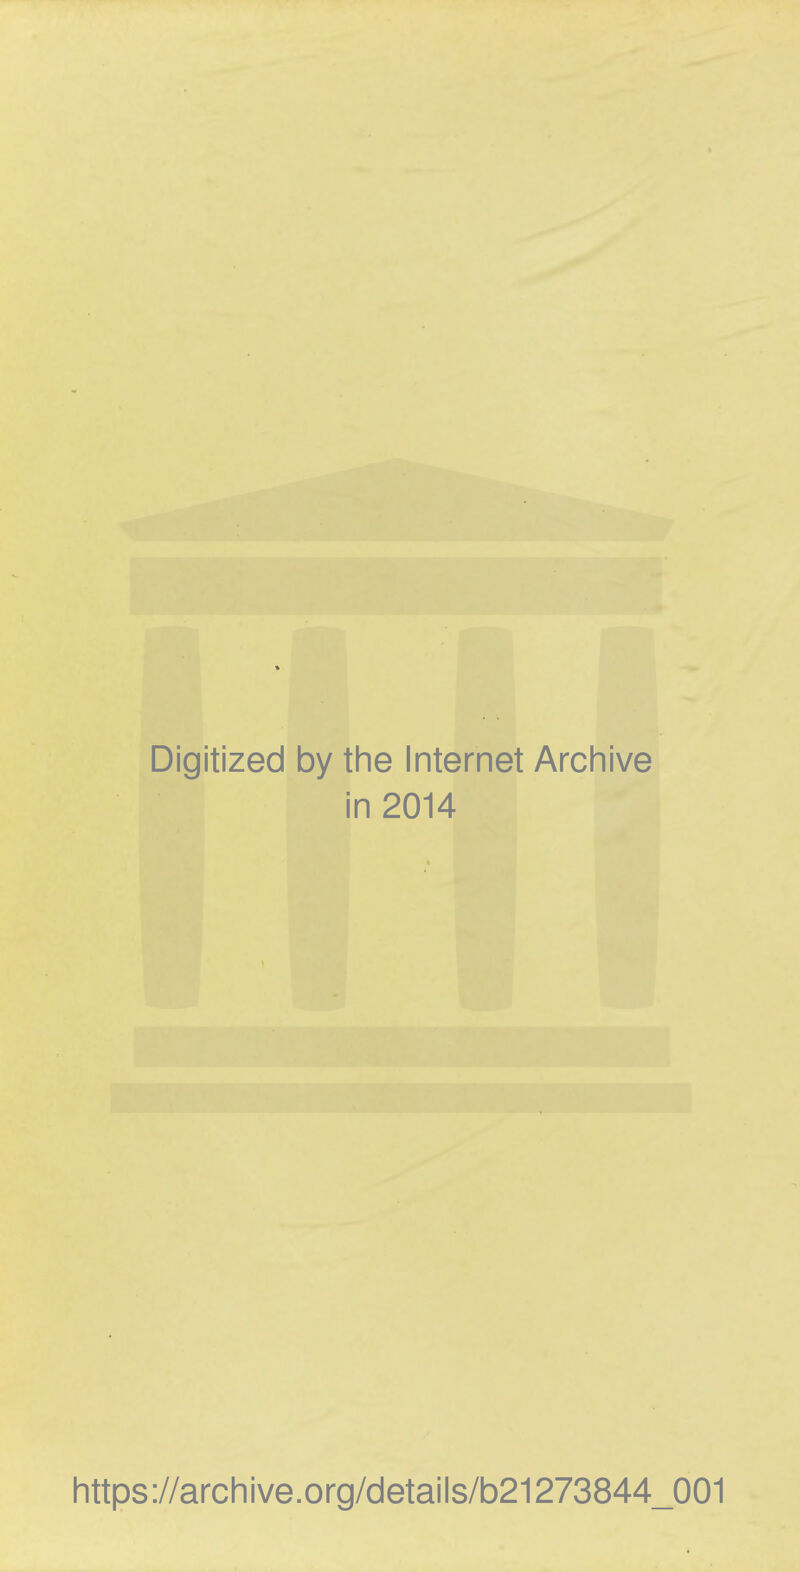 Digitized by the Internet Archive in 2014 https://archive.org/details/b21273844_001